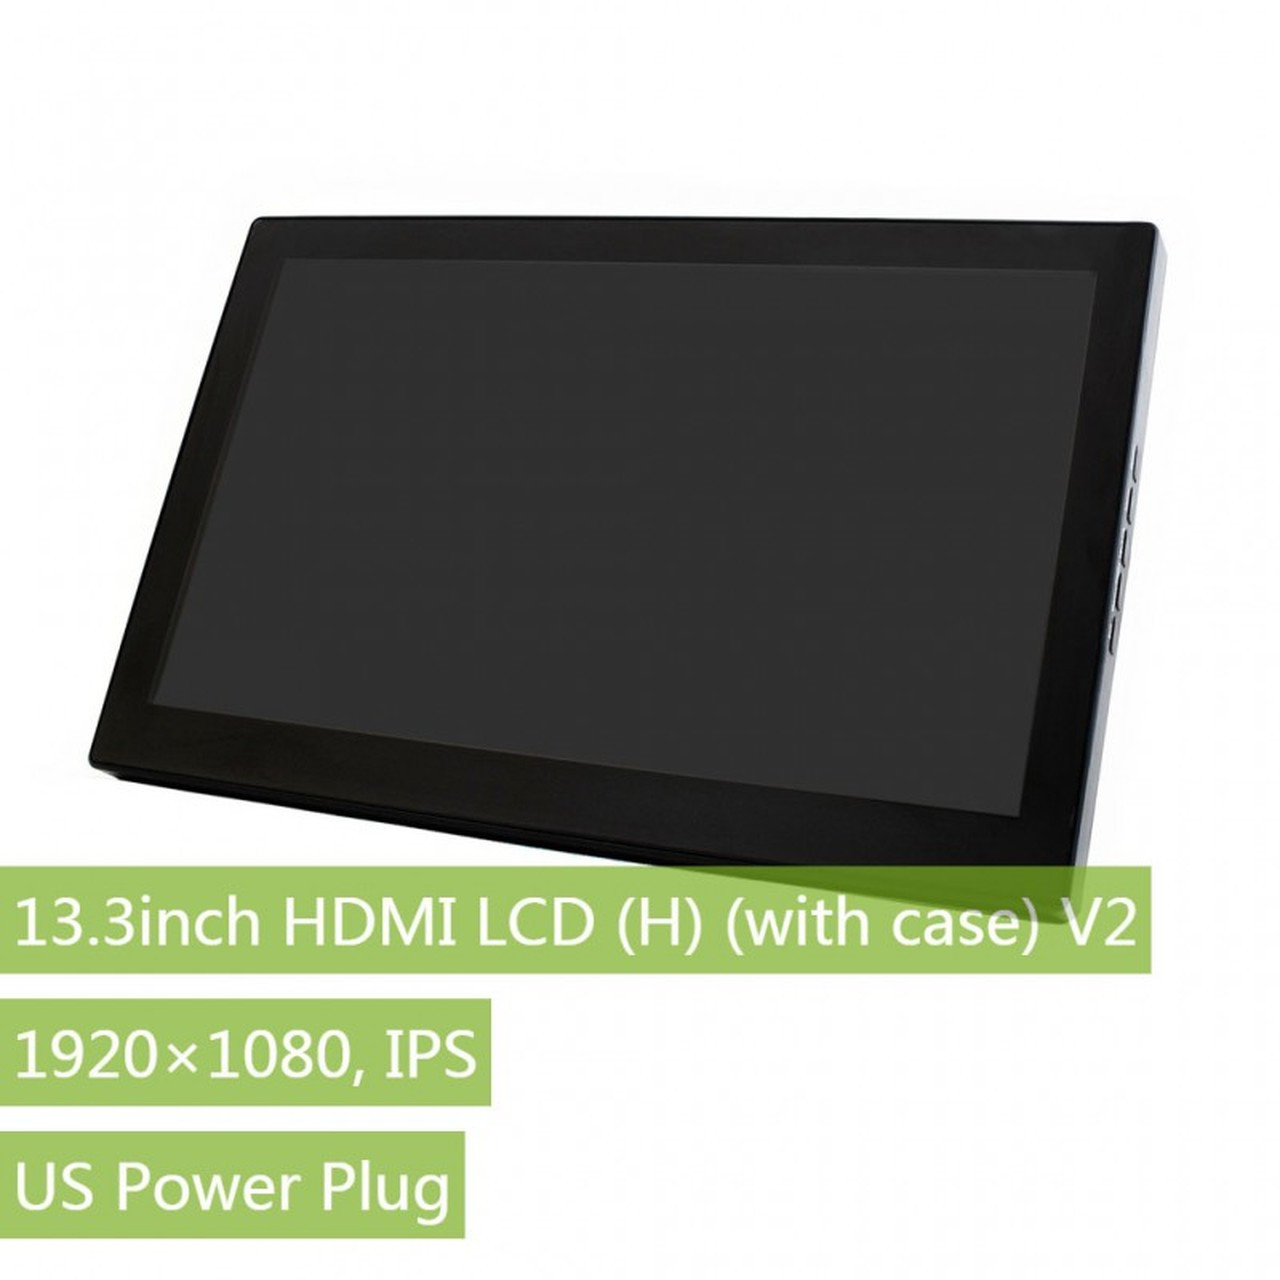 13.3inch HDMI LCD (H) Display (with case), 1920x1080, IPS